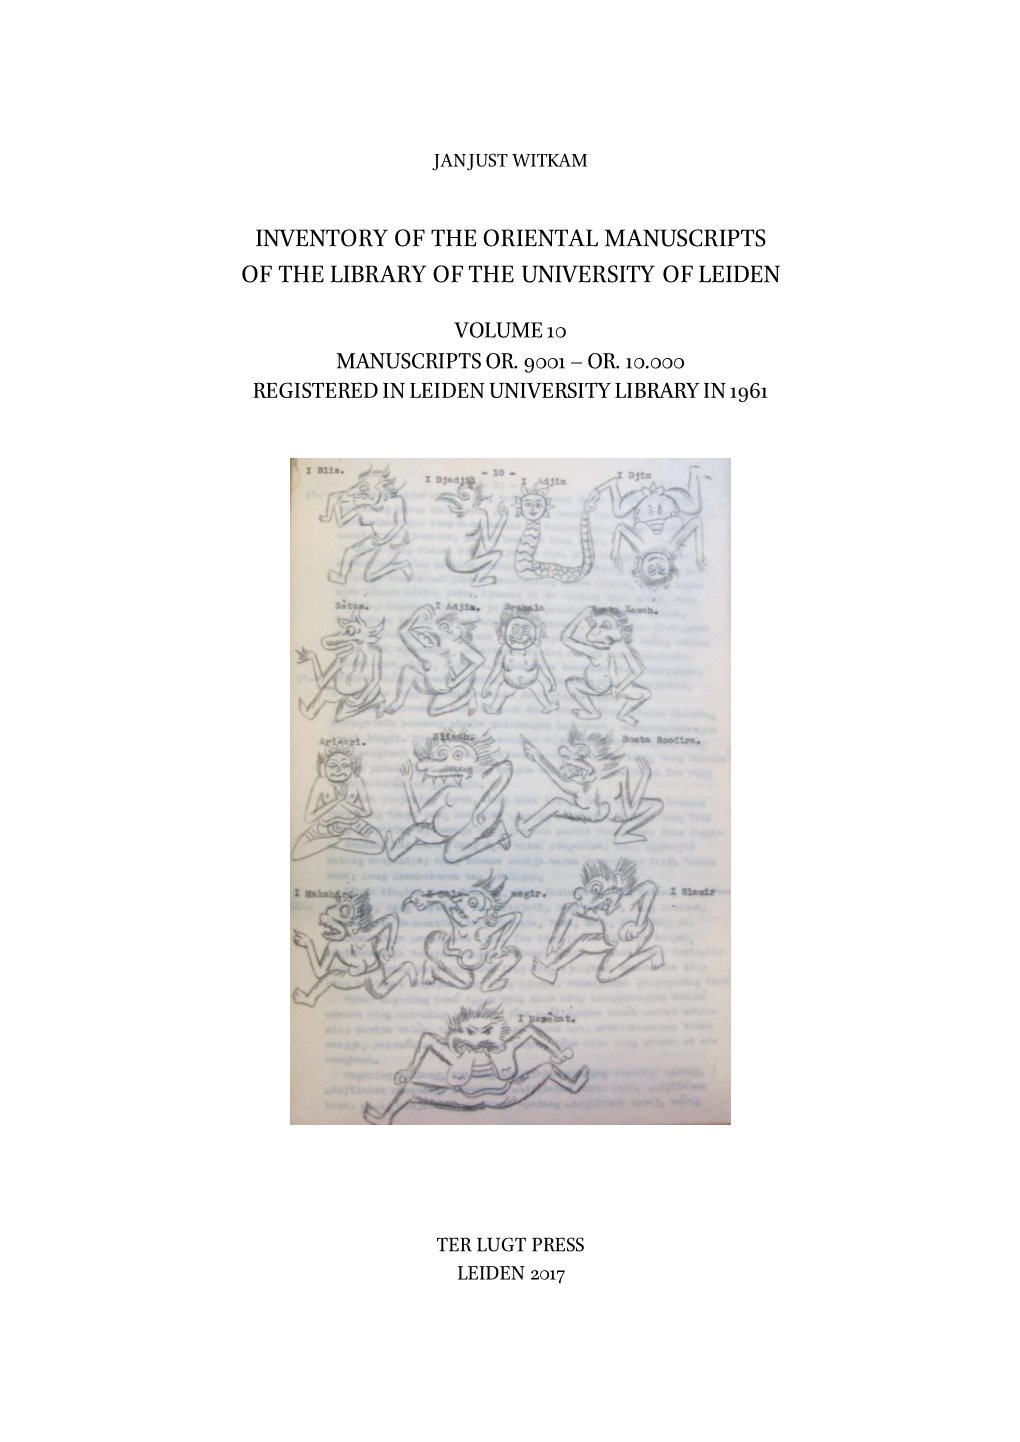 Inventory of the Oriental Manuscripts of the Library of the University of Leiden